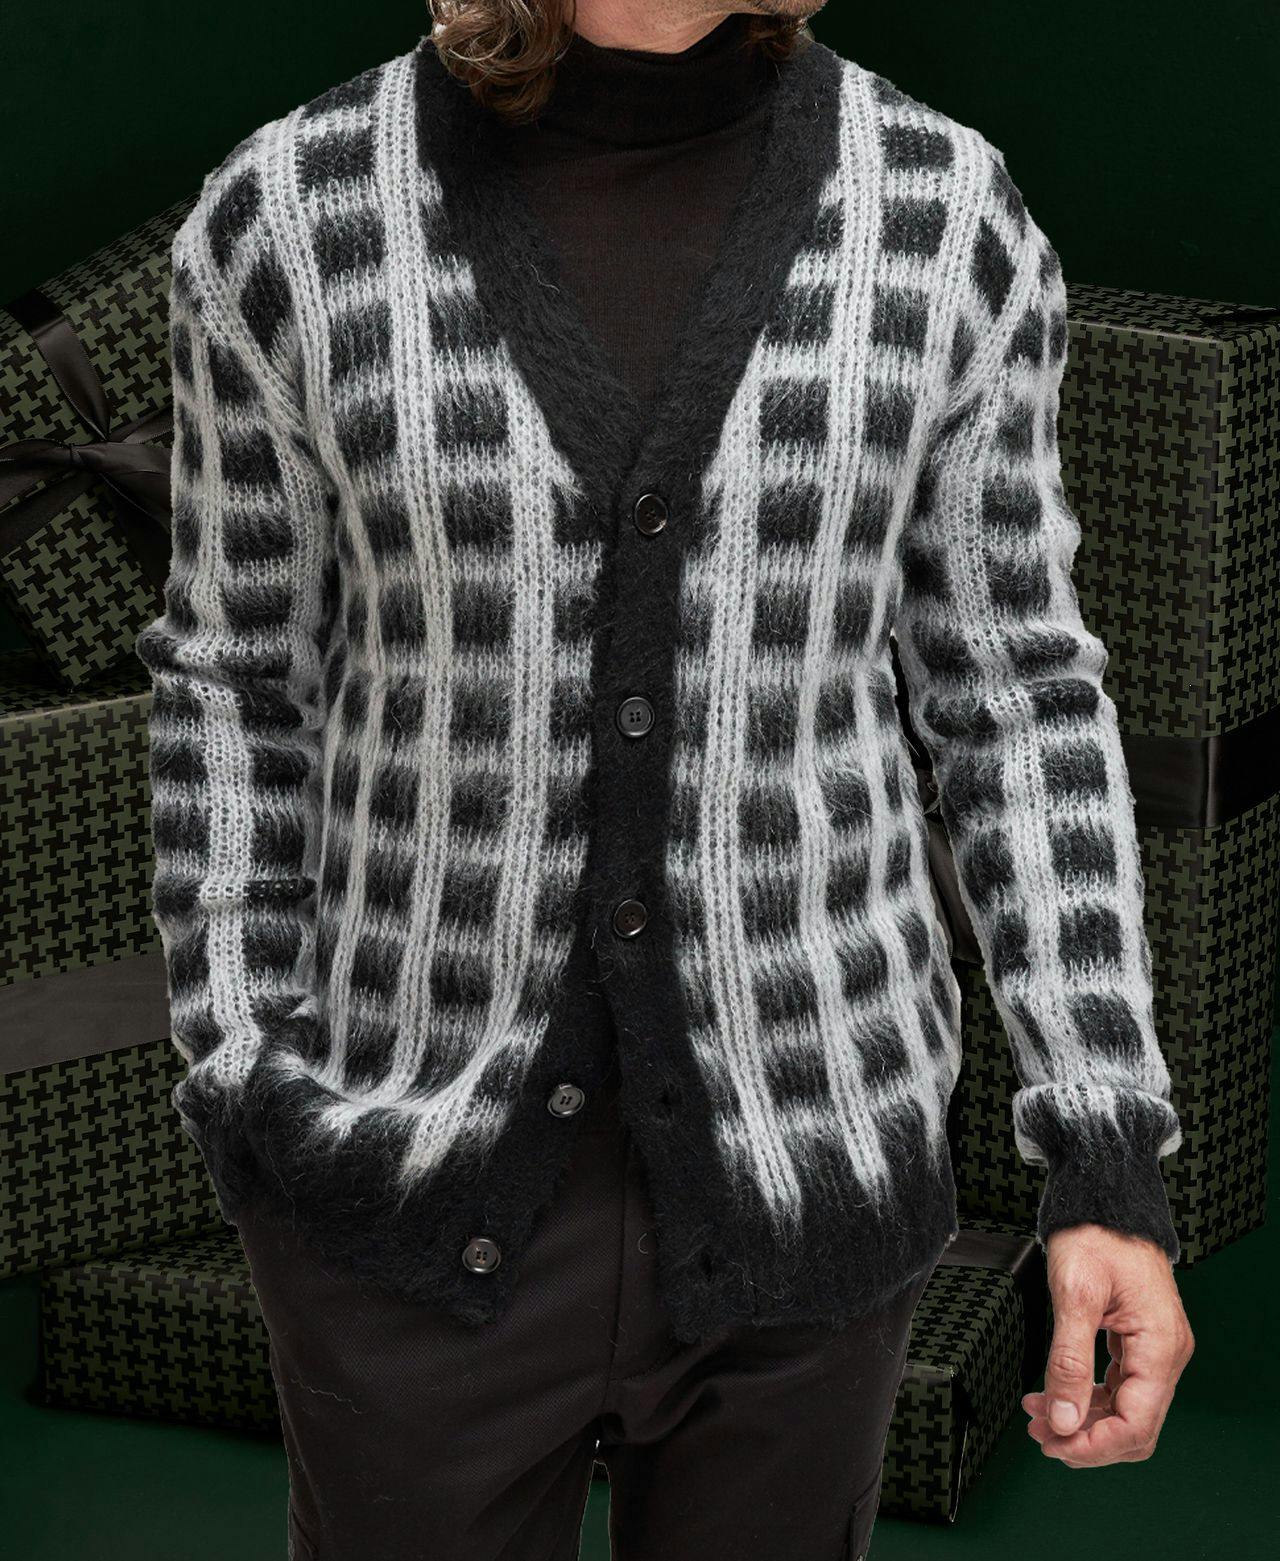 Model displaying Marni Checkered Mohair Cardigan against dark green gift boxes background